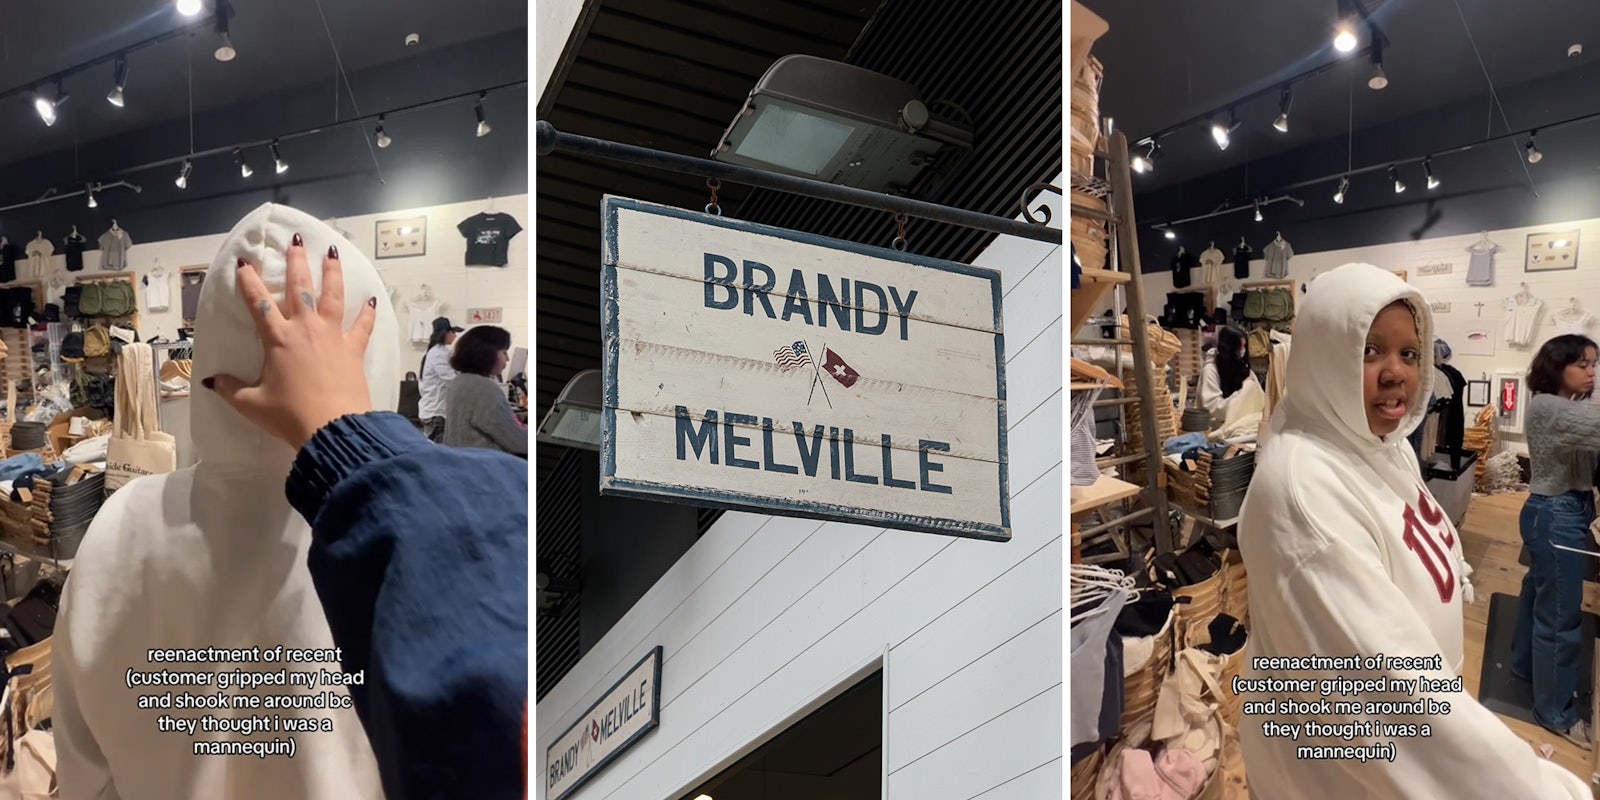 Brandy Melville worker shares what happened when a customer mistook her for a mannequin